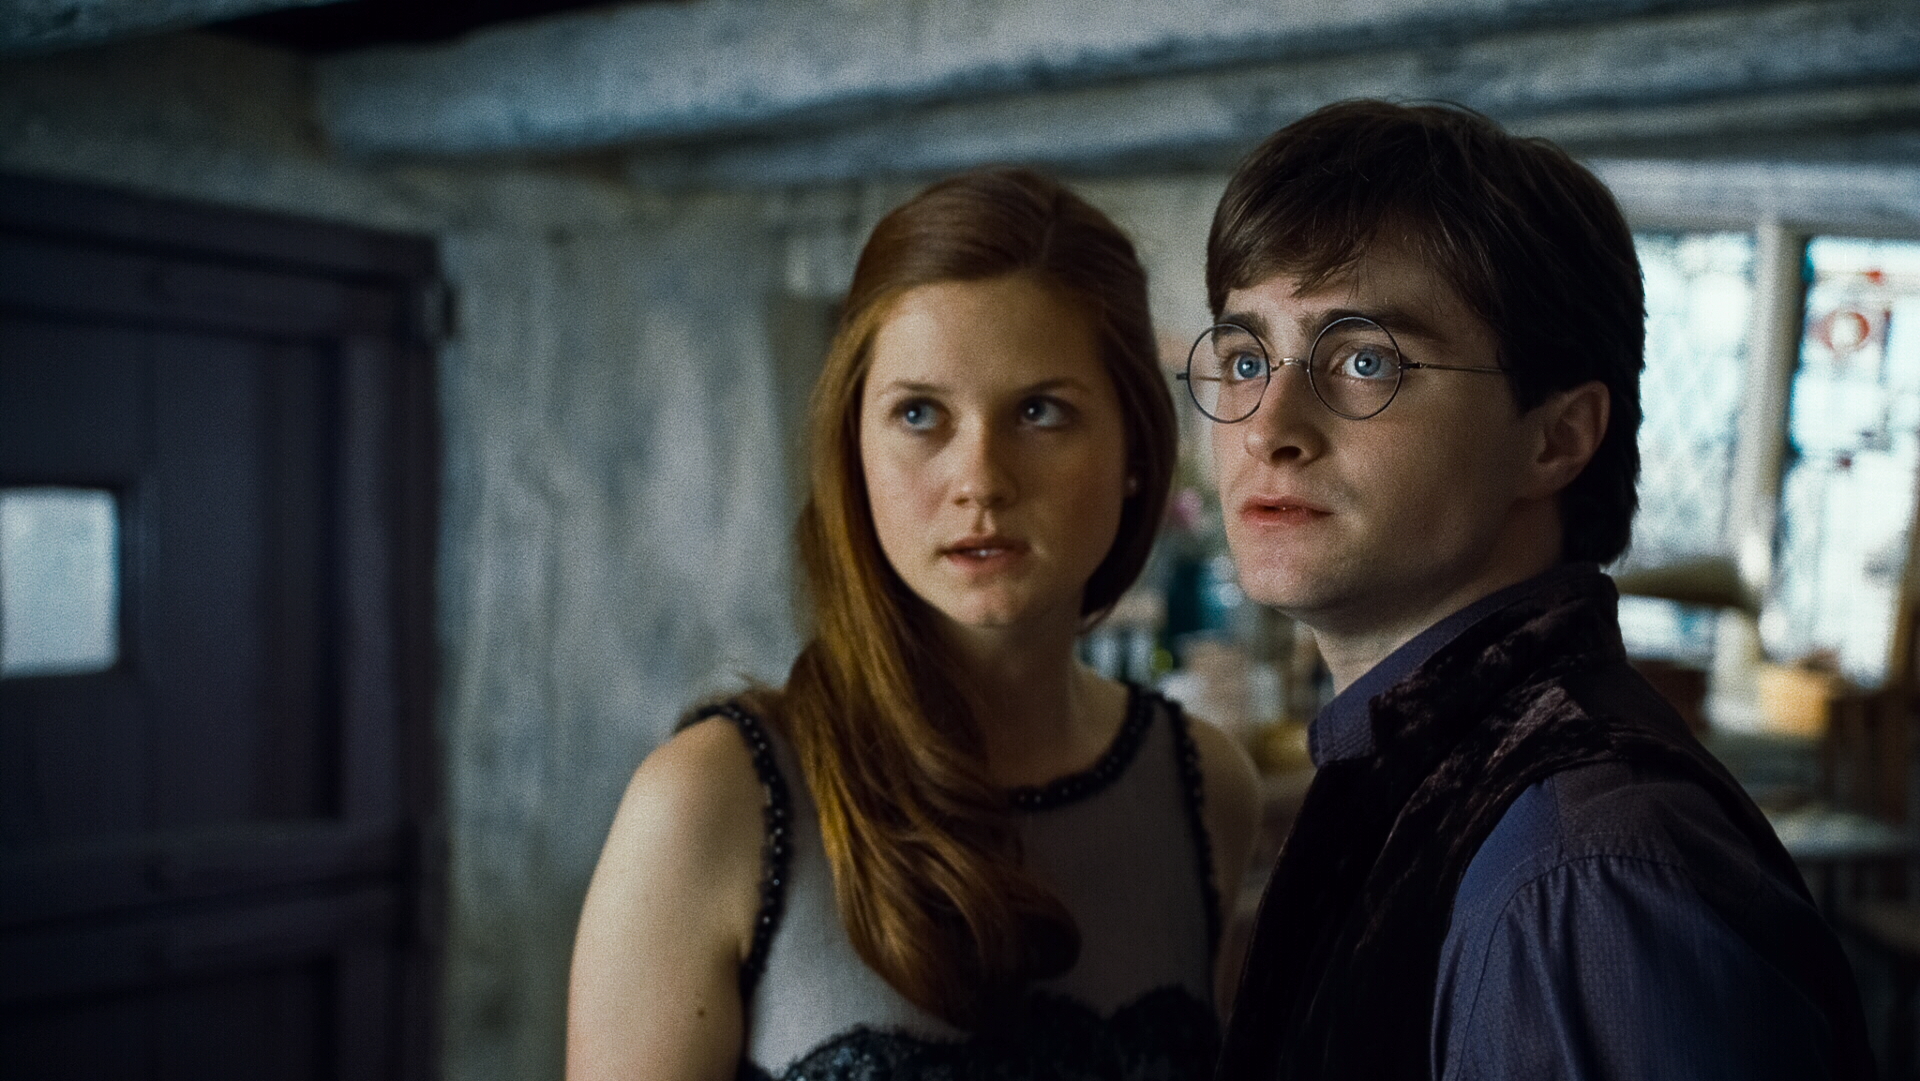 harry potter, movie, harry potter and the deathly hallows: part 1, ginny weasley